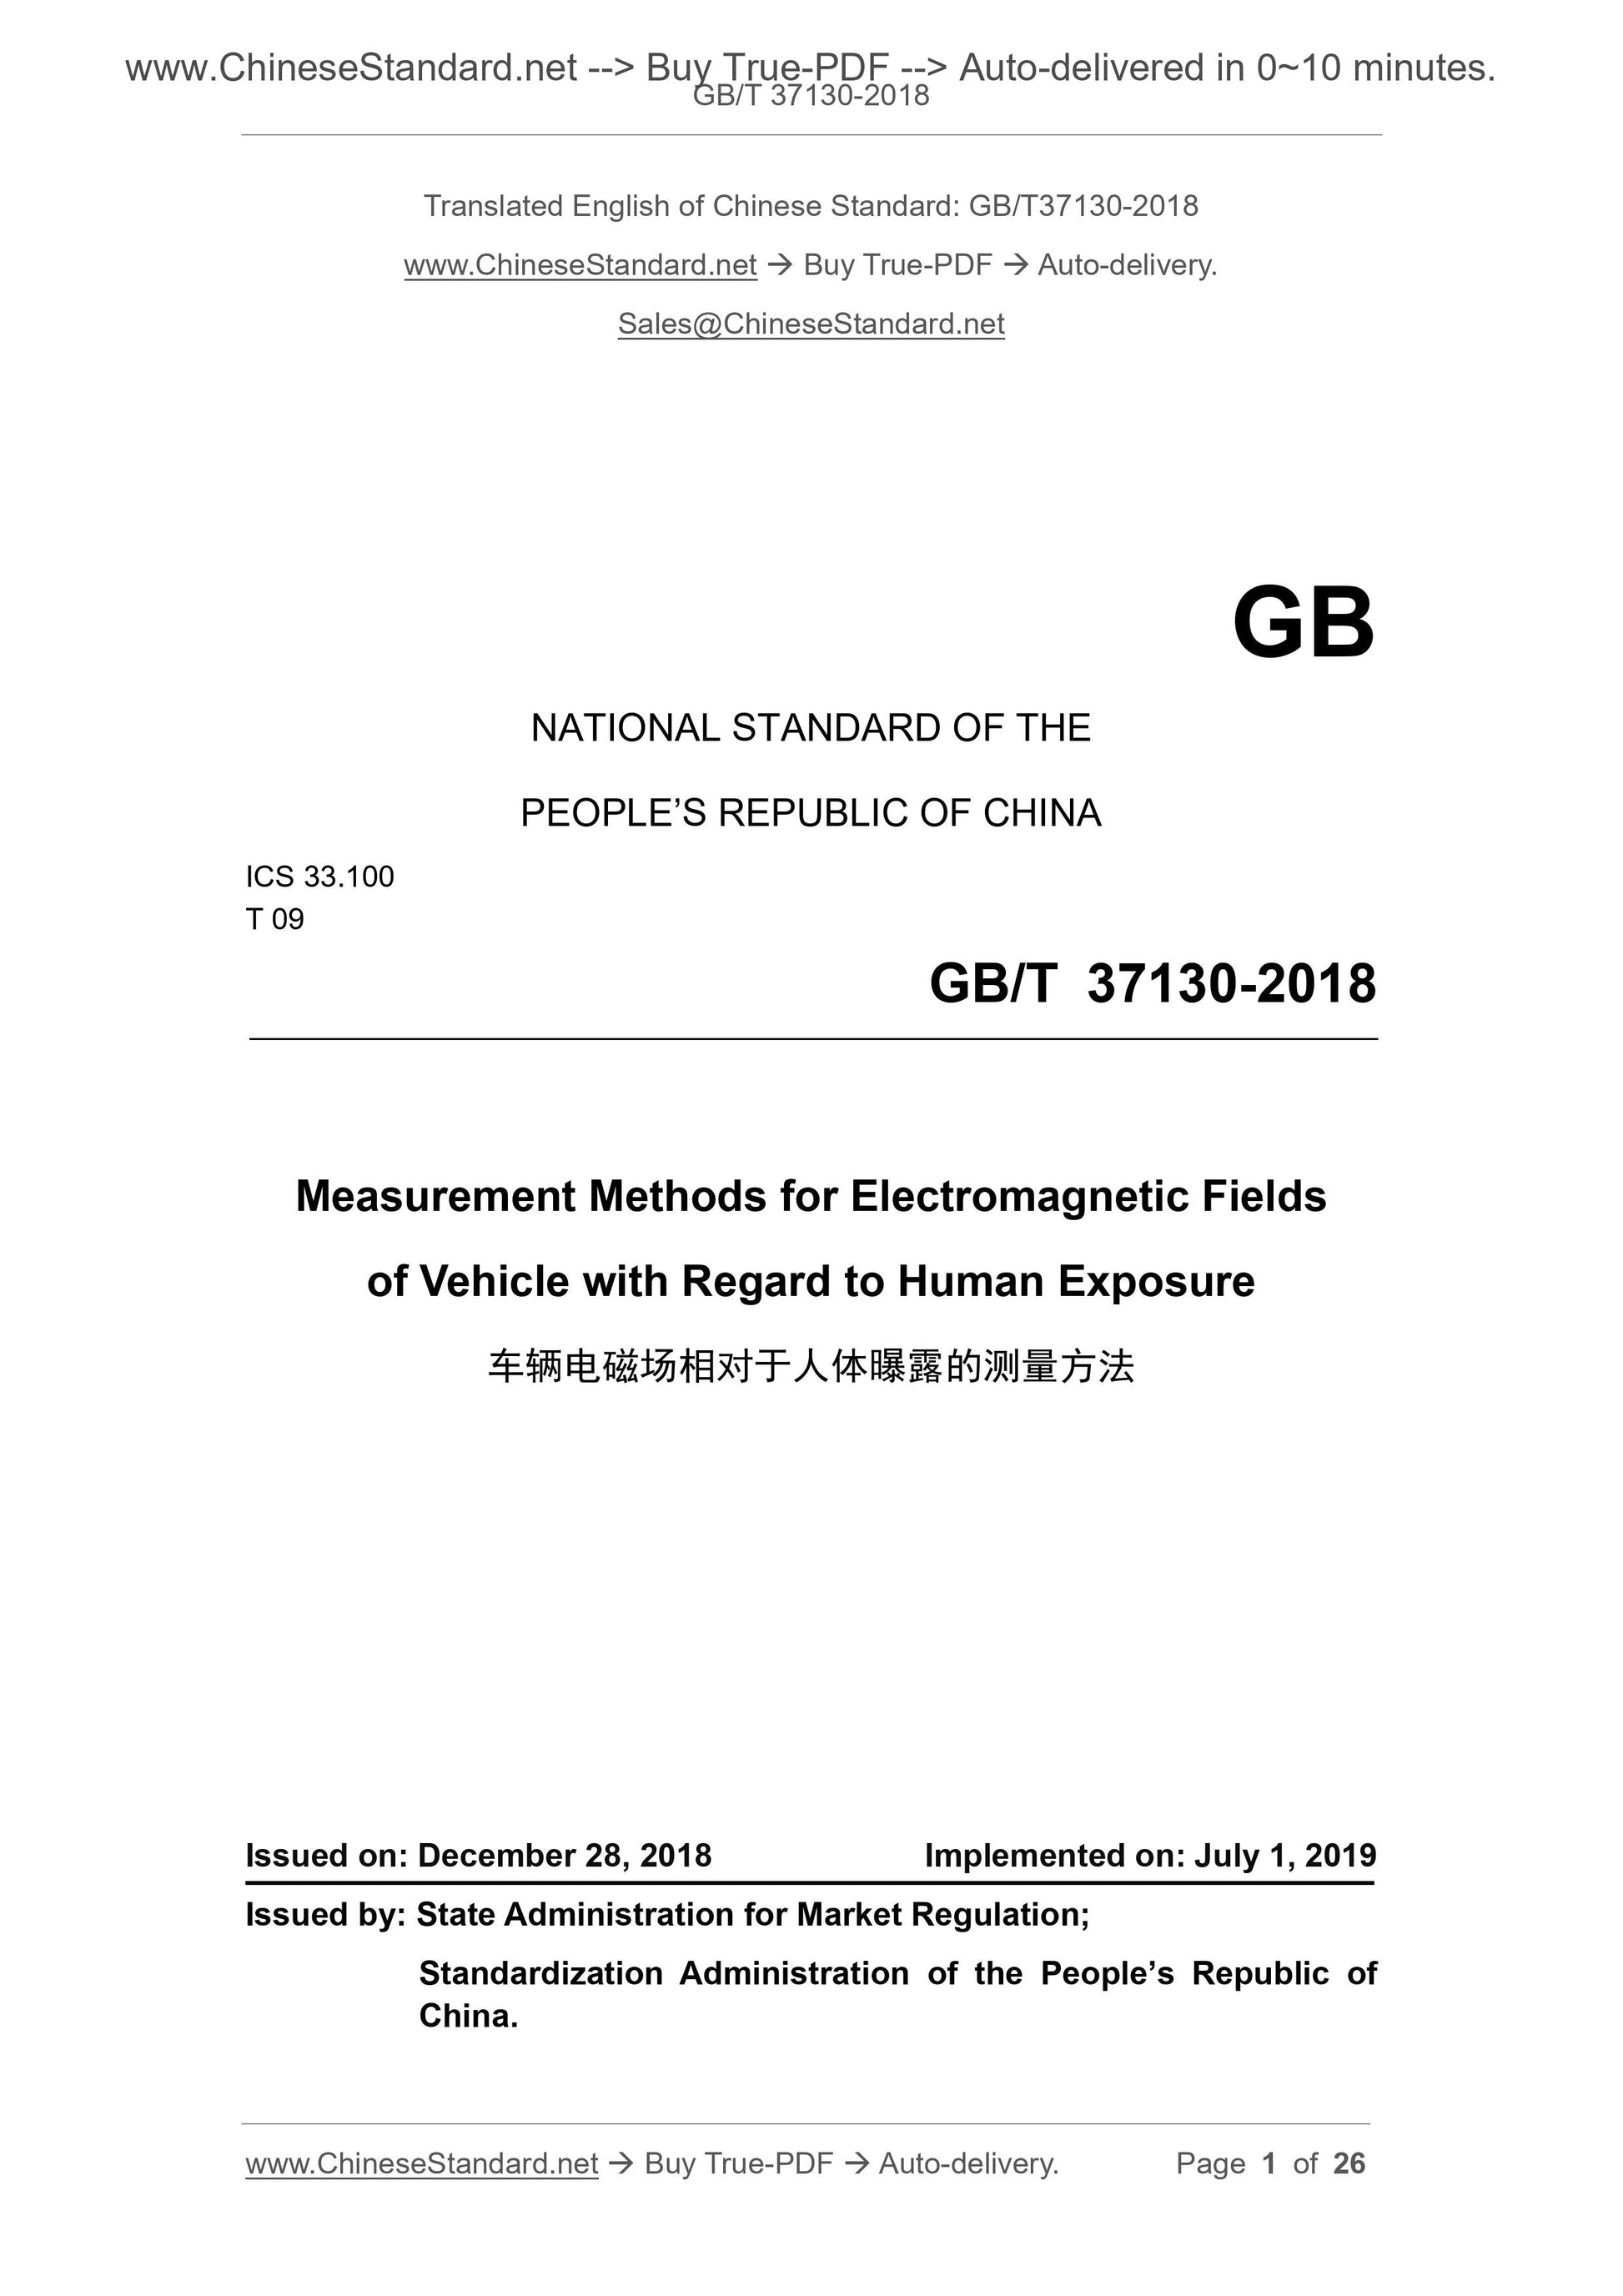 GB/T 37130-2018 Page 1